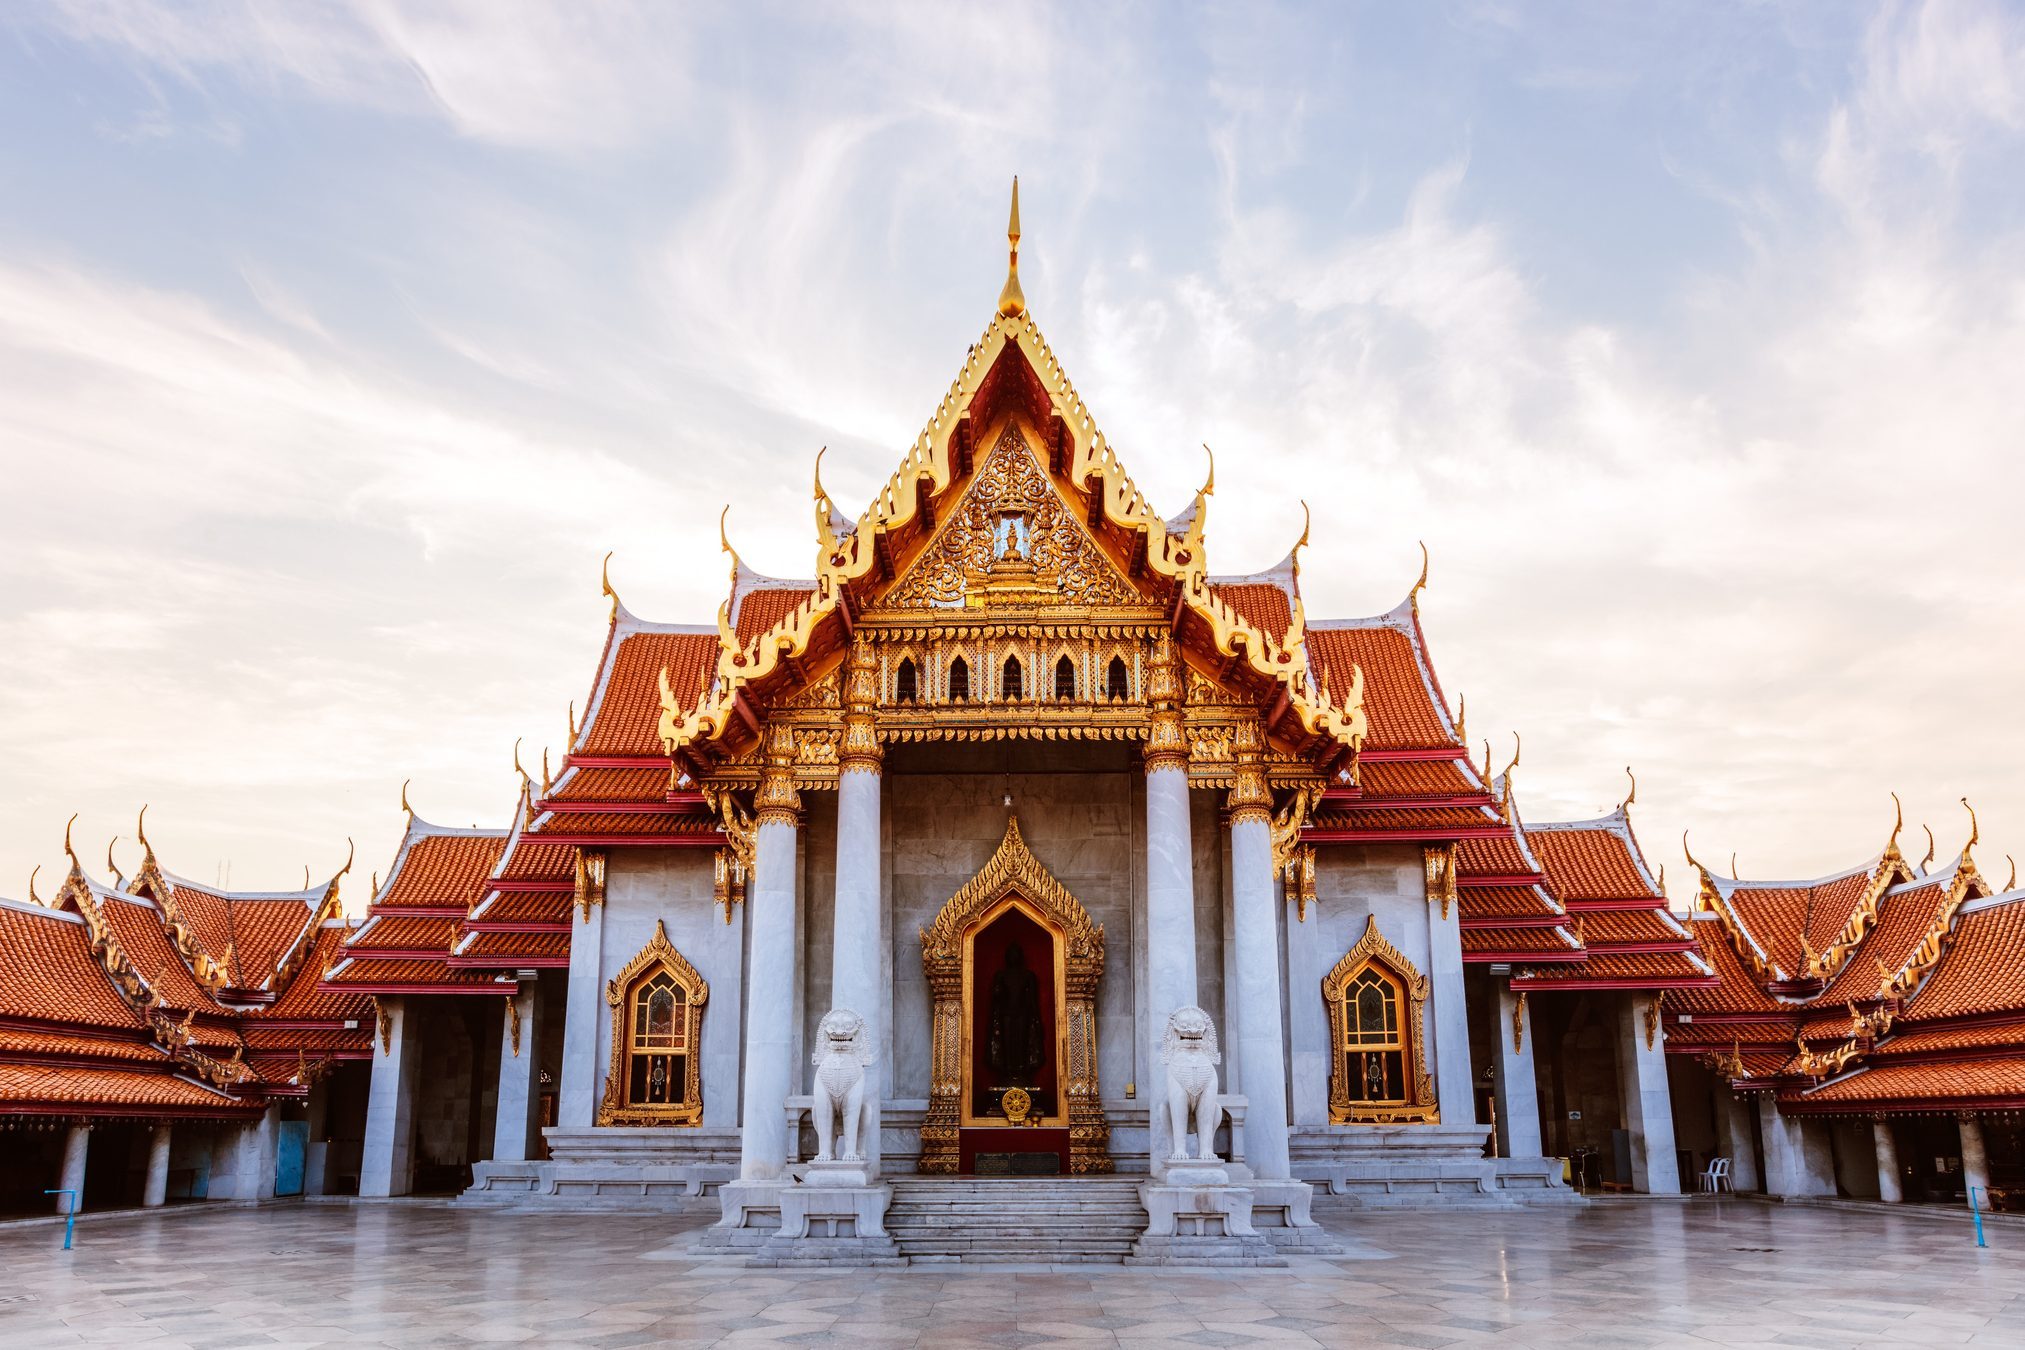 <p class=""><strong>Best for: </strong>A great deal</p> <p>Bangkok is the spot to head to for <a href="https://www.rd.com/list/affordable-bucket-list-travel-destinations/" rel="noopener noreferrer">affordable bucket-list travel</a>. Here, golden temples and palaces line the winding Chao Phraya River, and travelers can take advantage of affordable luxuries such as authentic Thai spas, with prices starting as low as $10 for a two-hour massage, incredible local cuisine for just a few dollars and a ride on a tuk-tuk costing just $1.50 an hour. Bangkok's quality of things to do (rated 4.51 out of 5)—hello, golden-Buddha-filled temples—and health care (a rating of 77 out of 100) helped secure its spot in the top five trips for seniors.</p> <p class="listicle-page__cta-button-shop"><a class="shop-btn" href="https://www.tripadvisor.com/Hotel_Review-g293916-d3157546-Reviews-La_Petite_Salil_Sukhumvit_11-Bangkok.html">Book a Hotel</a></p>